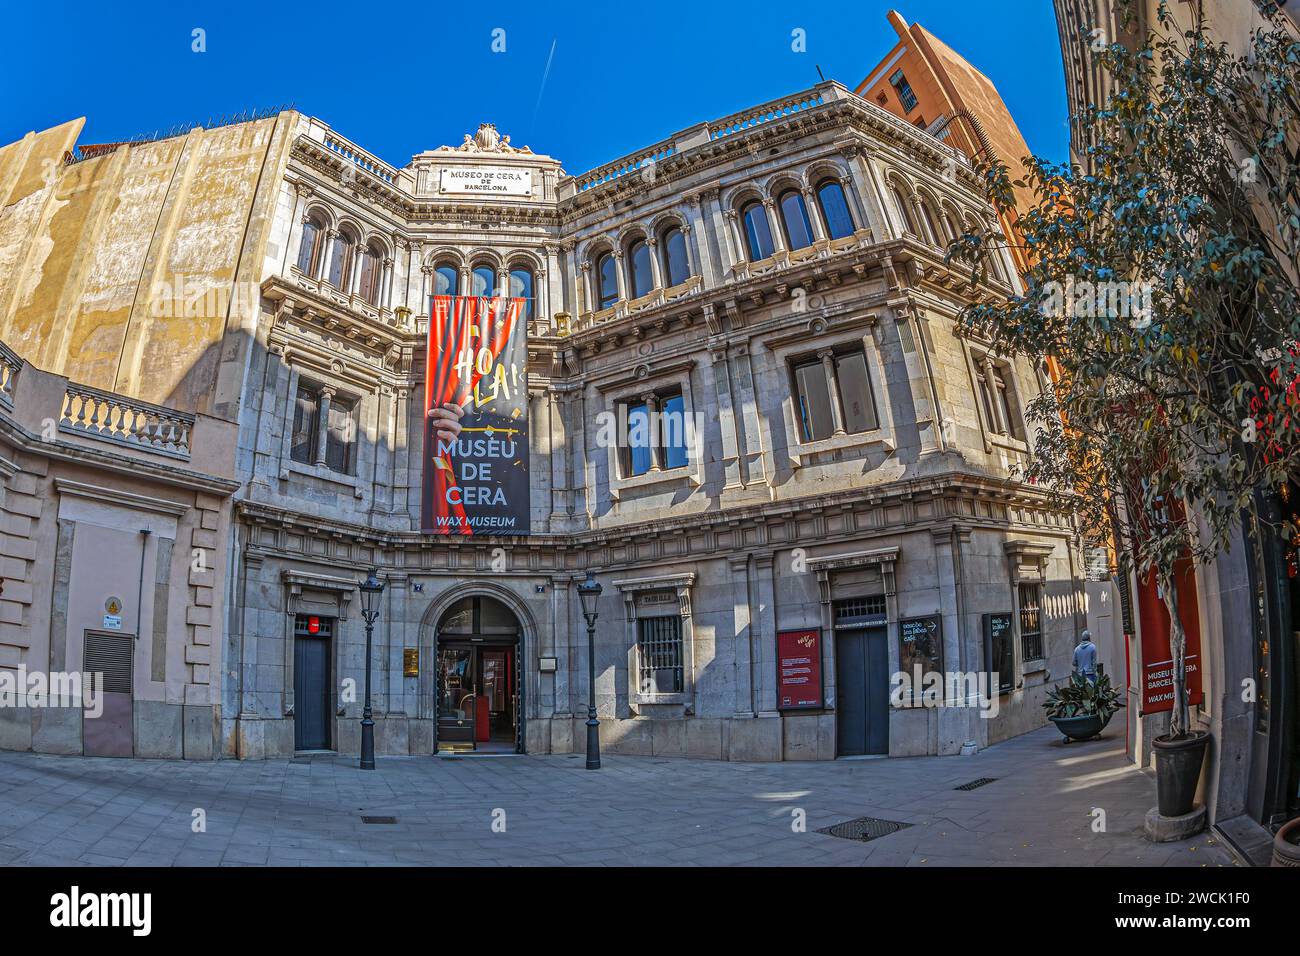 BARCELONA, SPAIN - MARCH 1, 2022: The building of Barcelona Wax Museum built in 1873 by the General Credit Company 'El Comercio'. Has a collection of Stock Photo